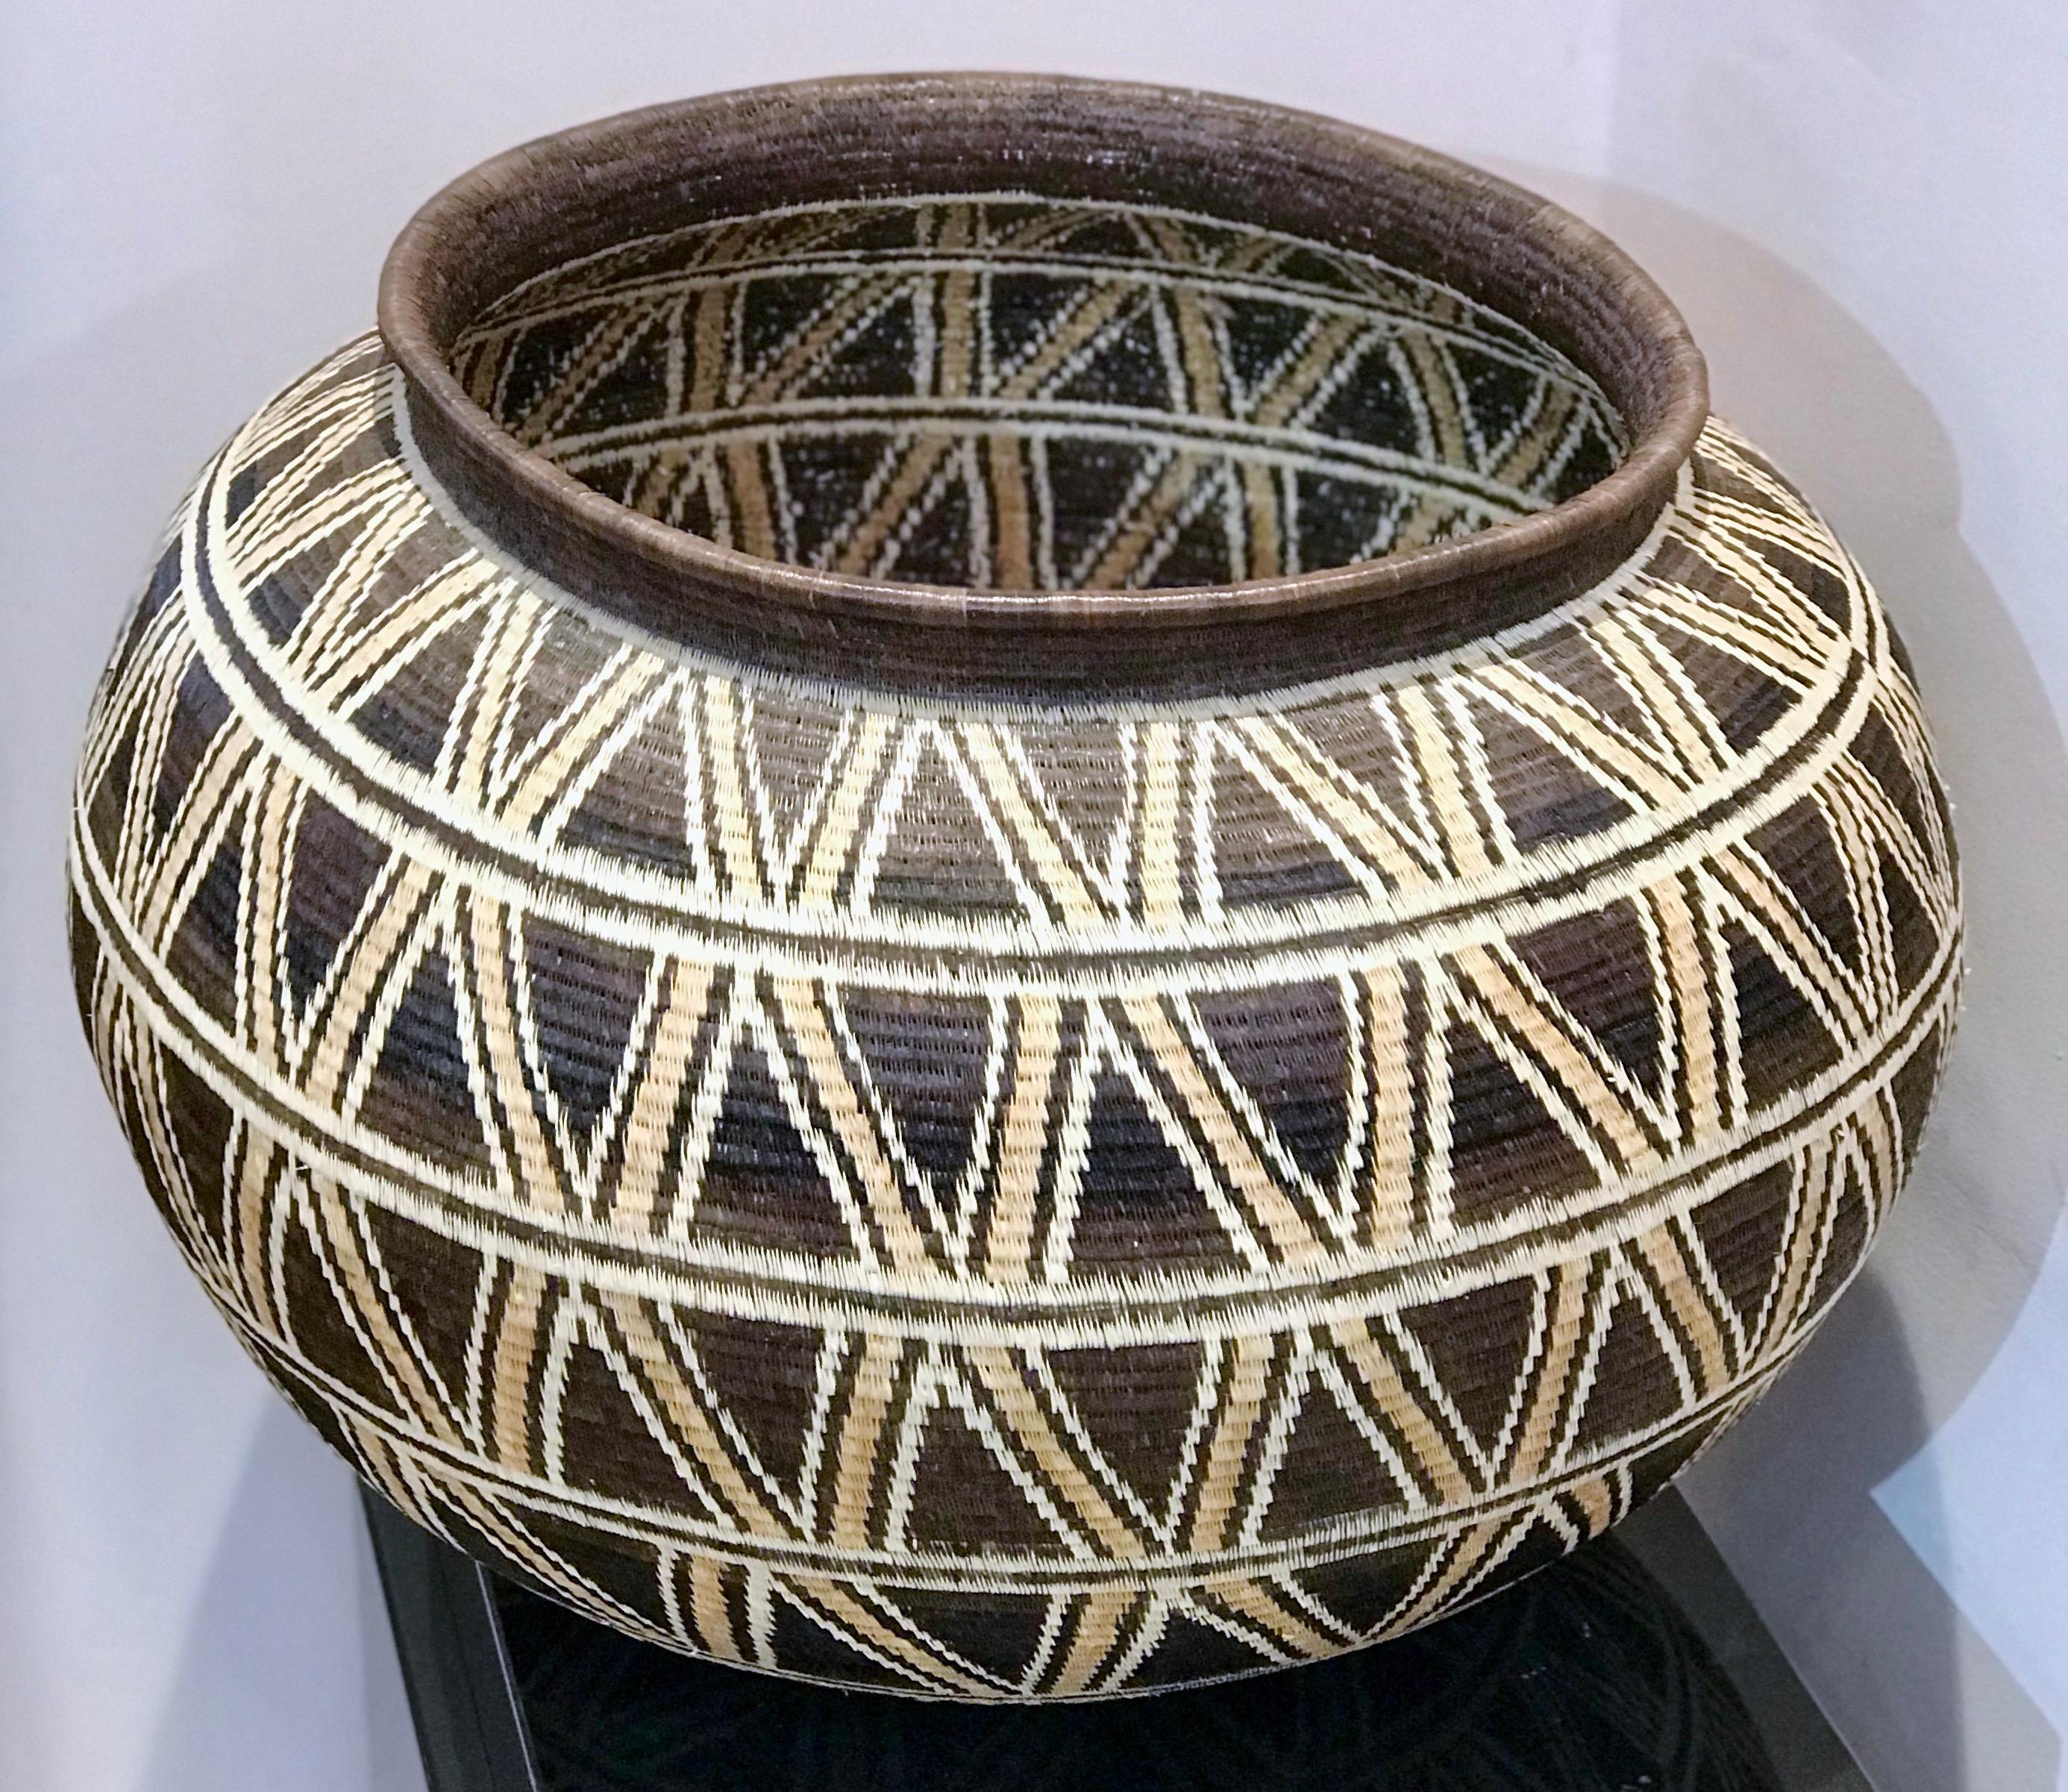 Basket by Elsa Quiros, large geometric design in brown, tan, white sunflower 2